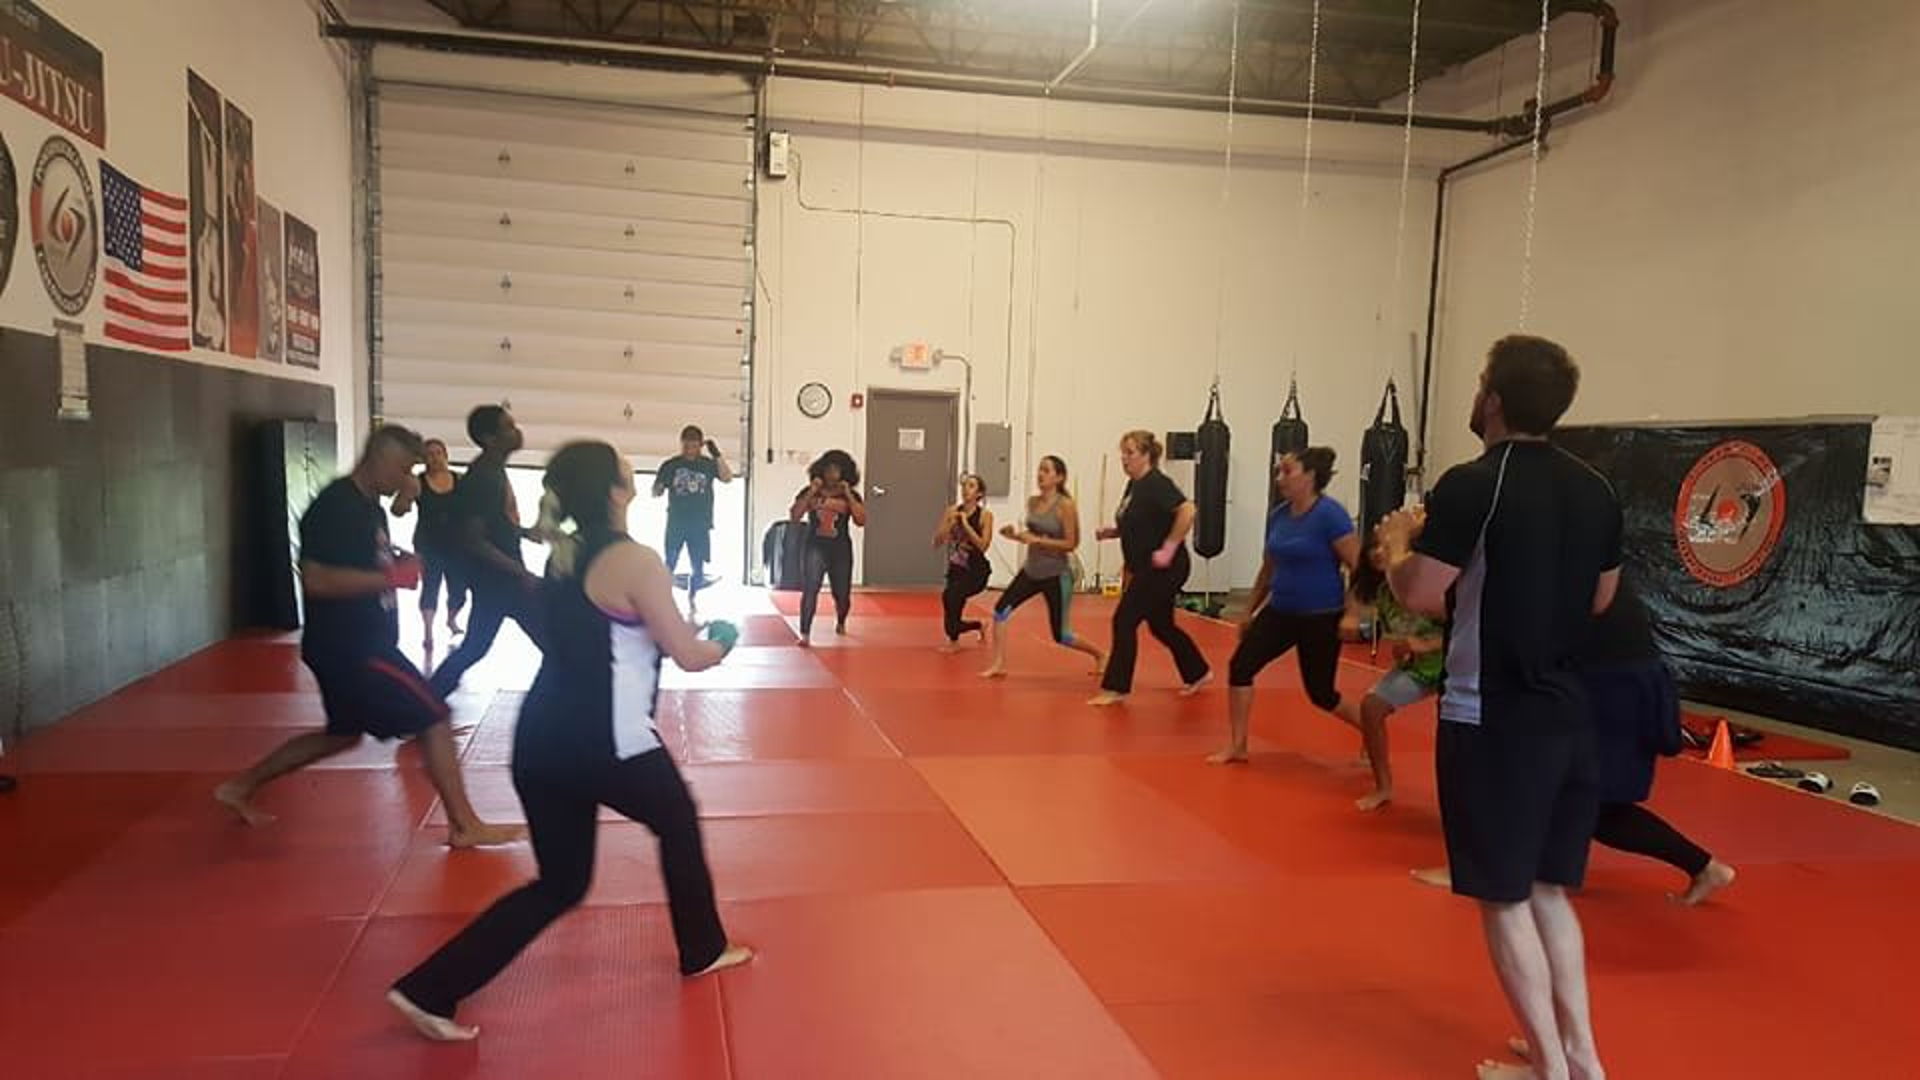 SpaceTogether 2400 sf martial arts warehouse